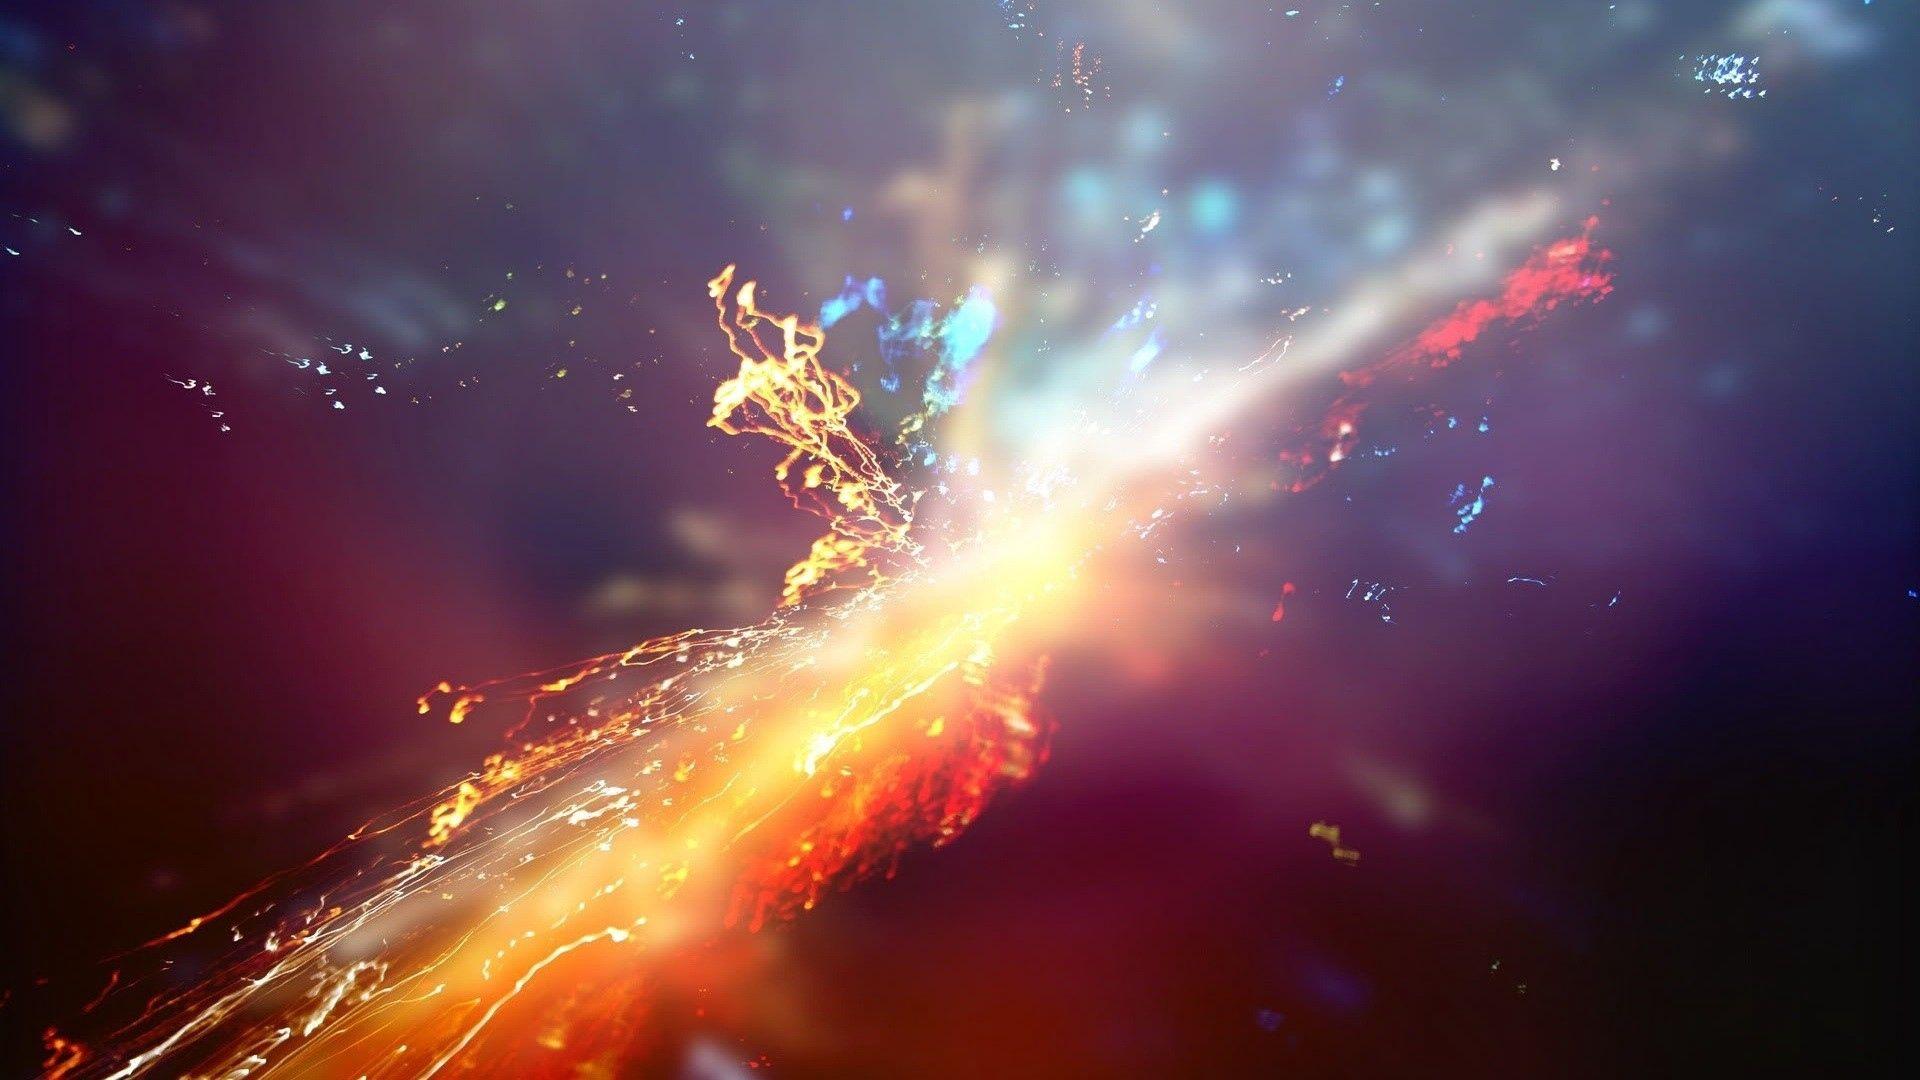 Download wallpaper 1920x1080 explosion, colorful, background, bright